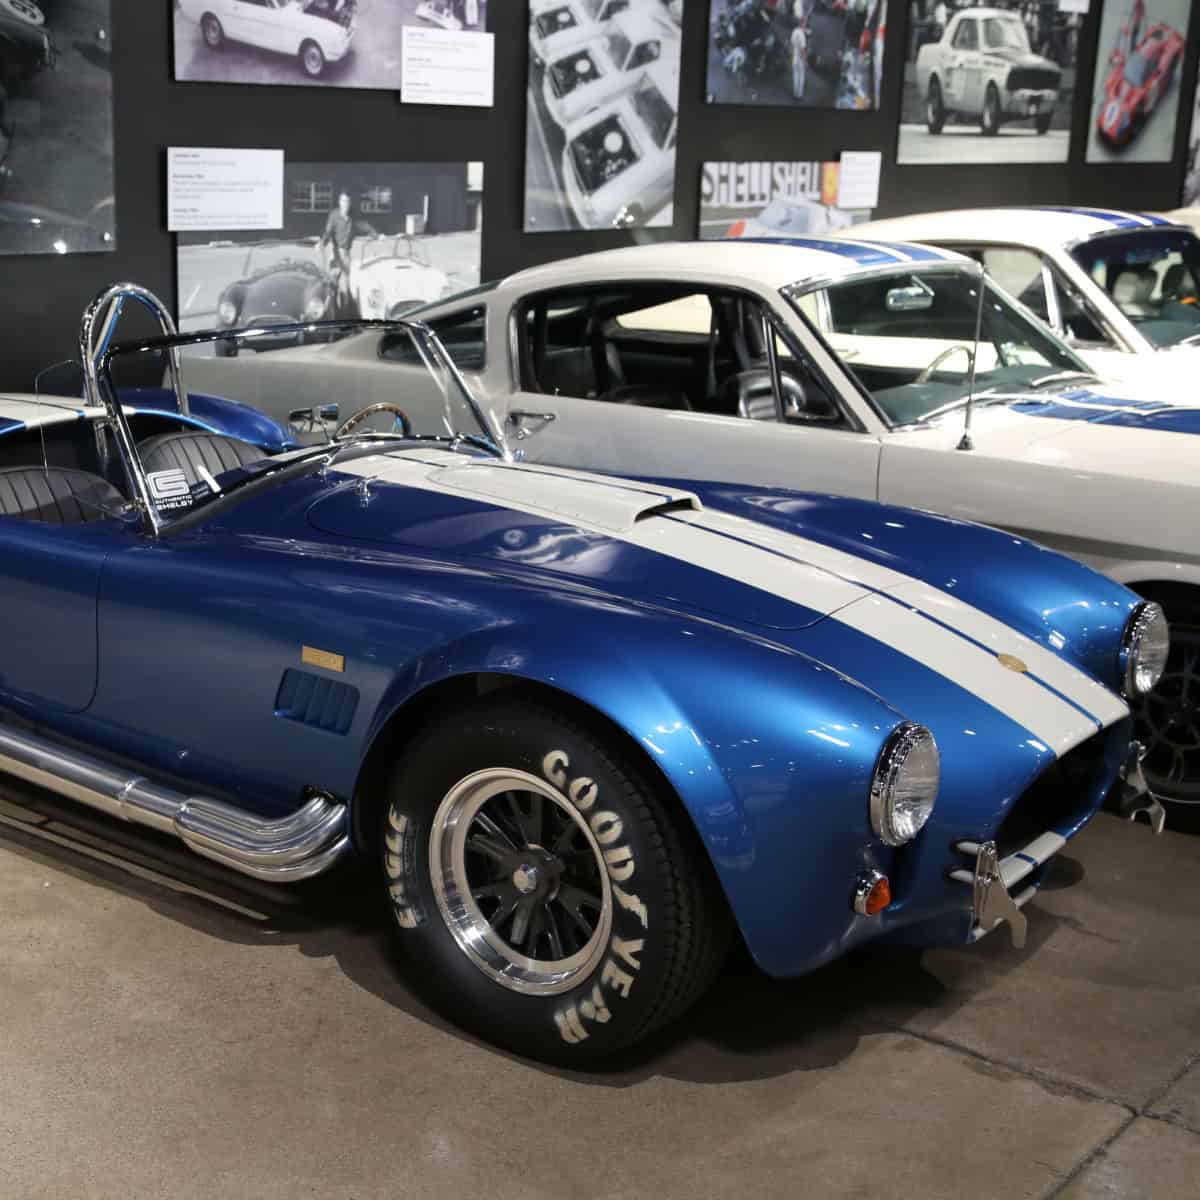 Blue and white striped Shelby next to additional cars with photos on the wall at the Shelby Museum